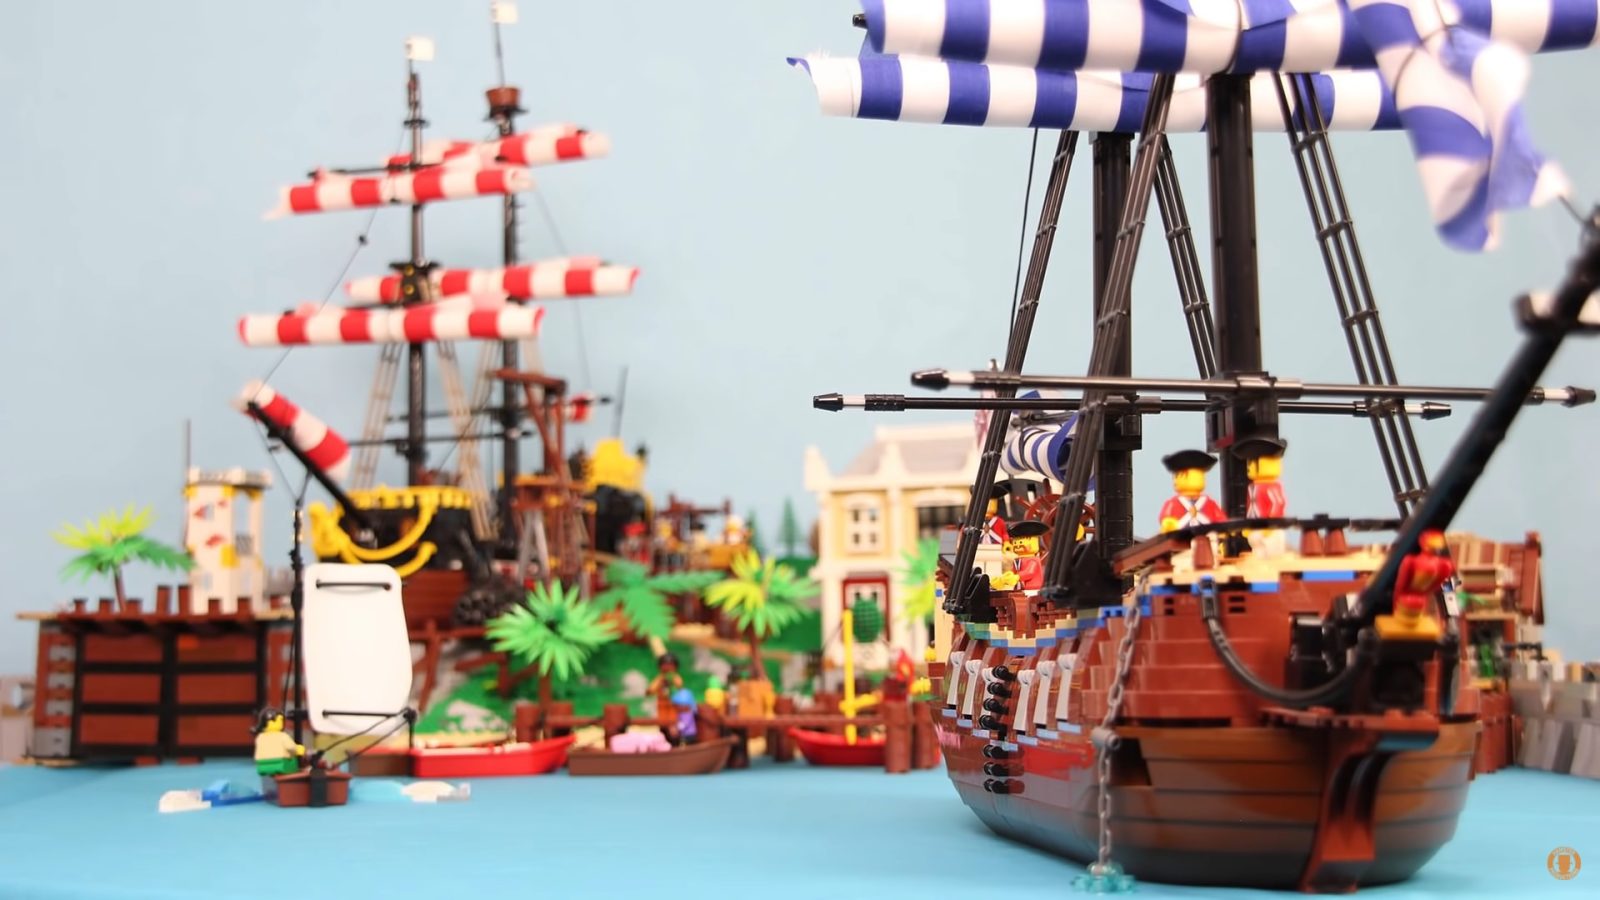 Featured Image for "Pirate Sea Battle - The Barracuda Heist" by Hamster Productions